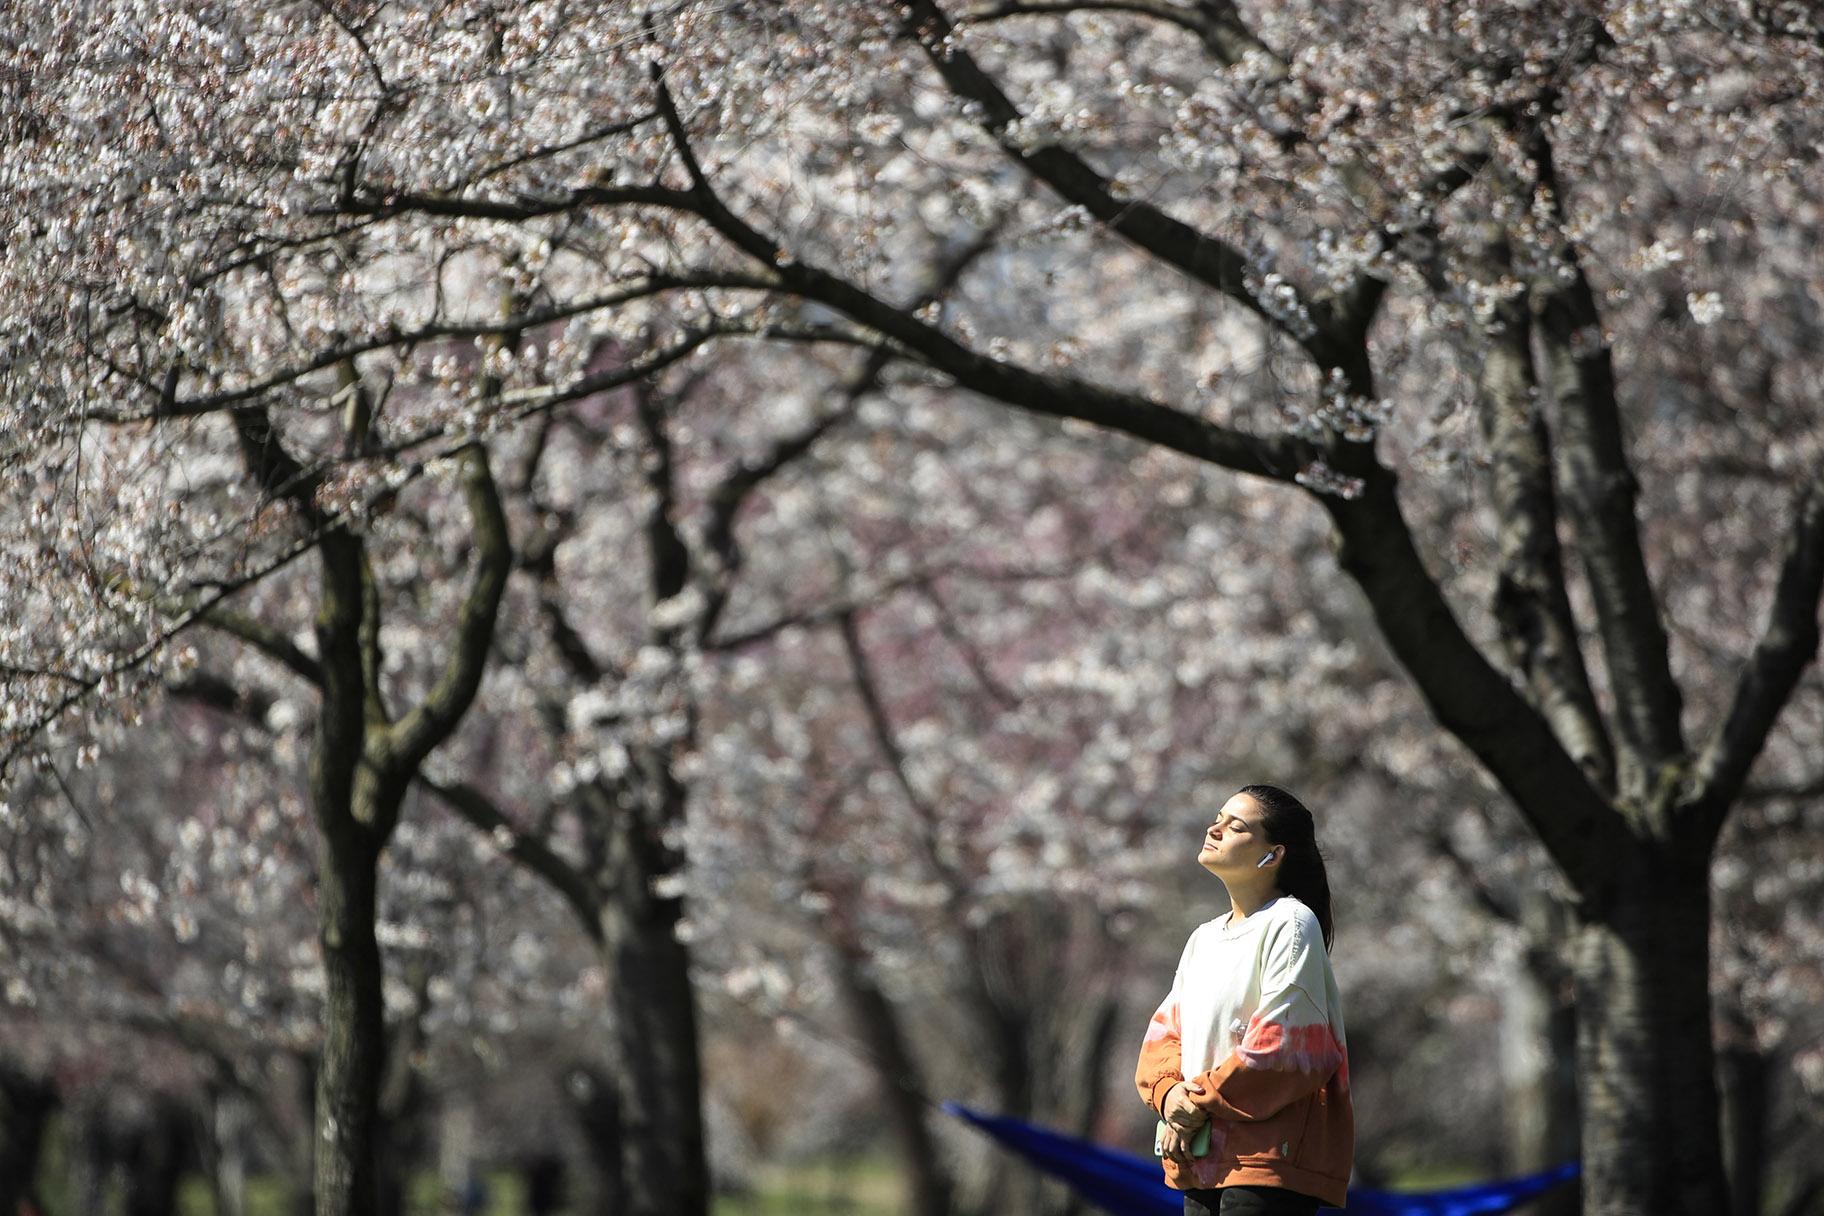 In this March 26, 2020, photo, a person takes in the afternoon sun amongst the cherry blossoms along Kelly Drive in Philadelphia. (AP Photo / Matt Rourke)